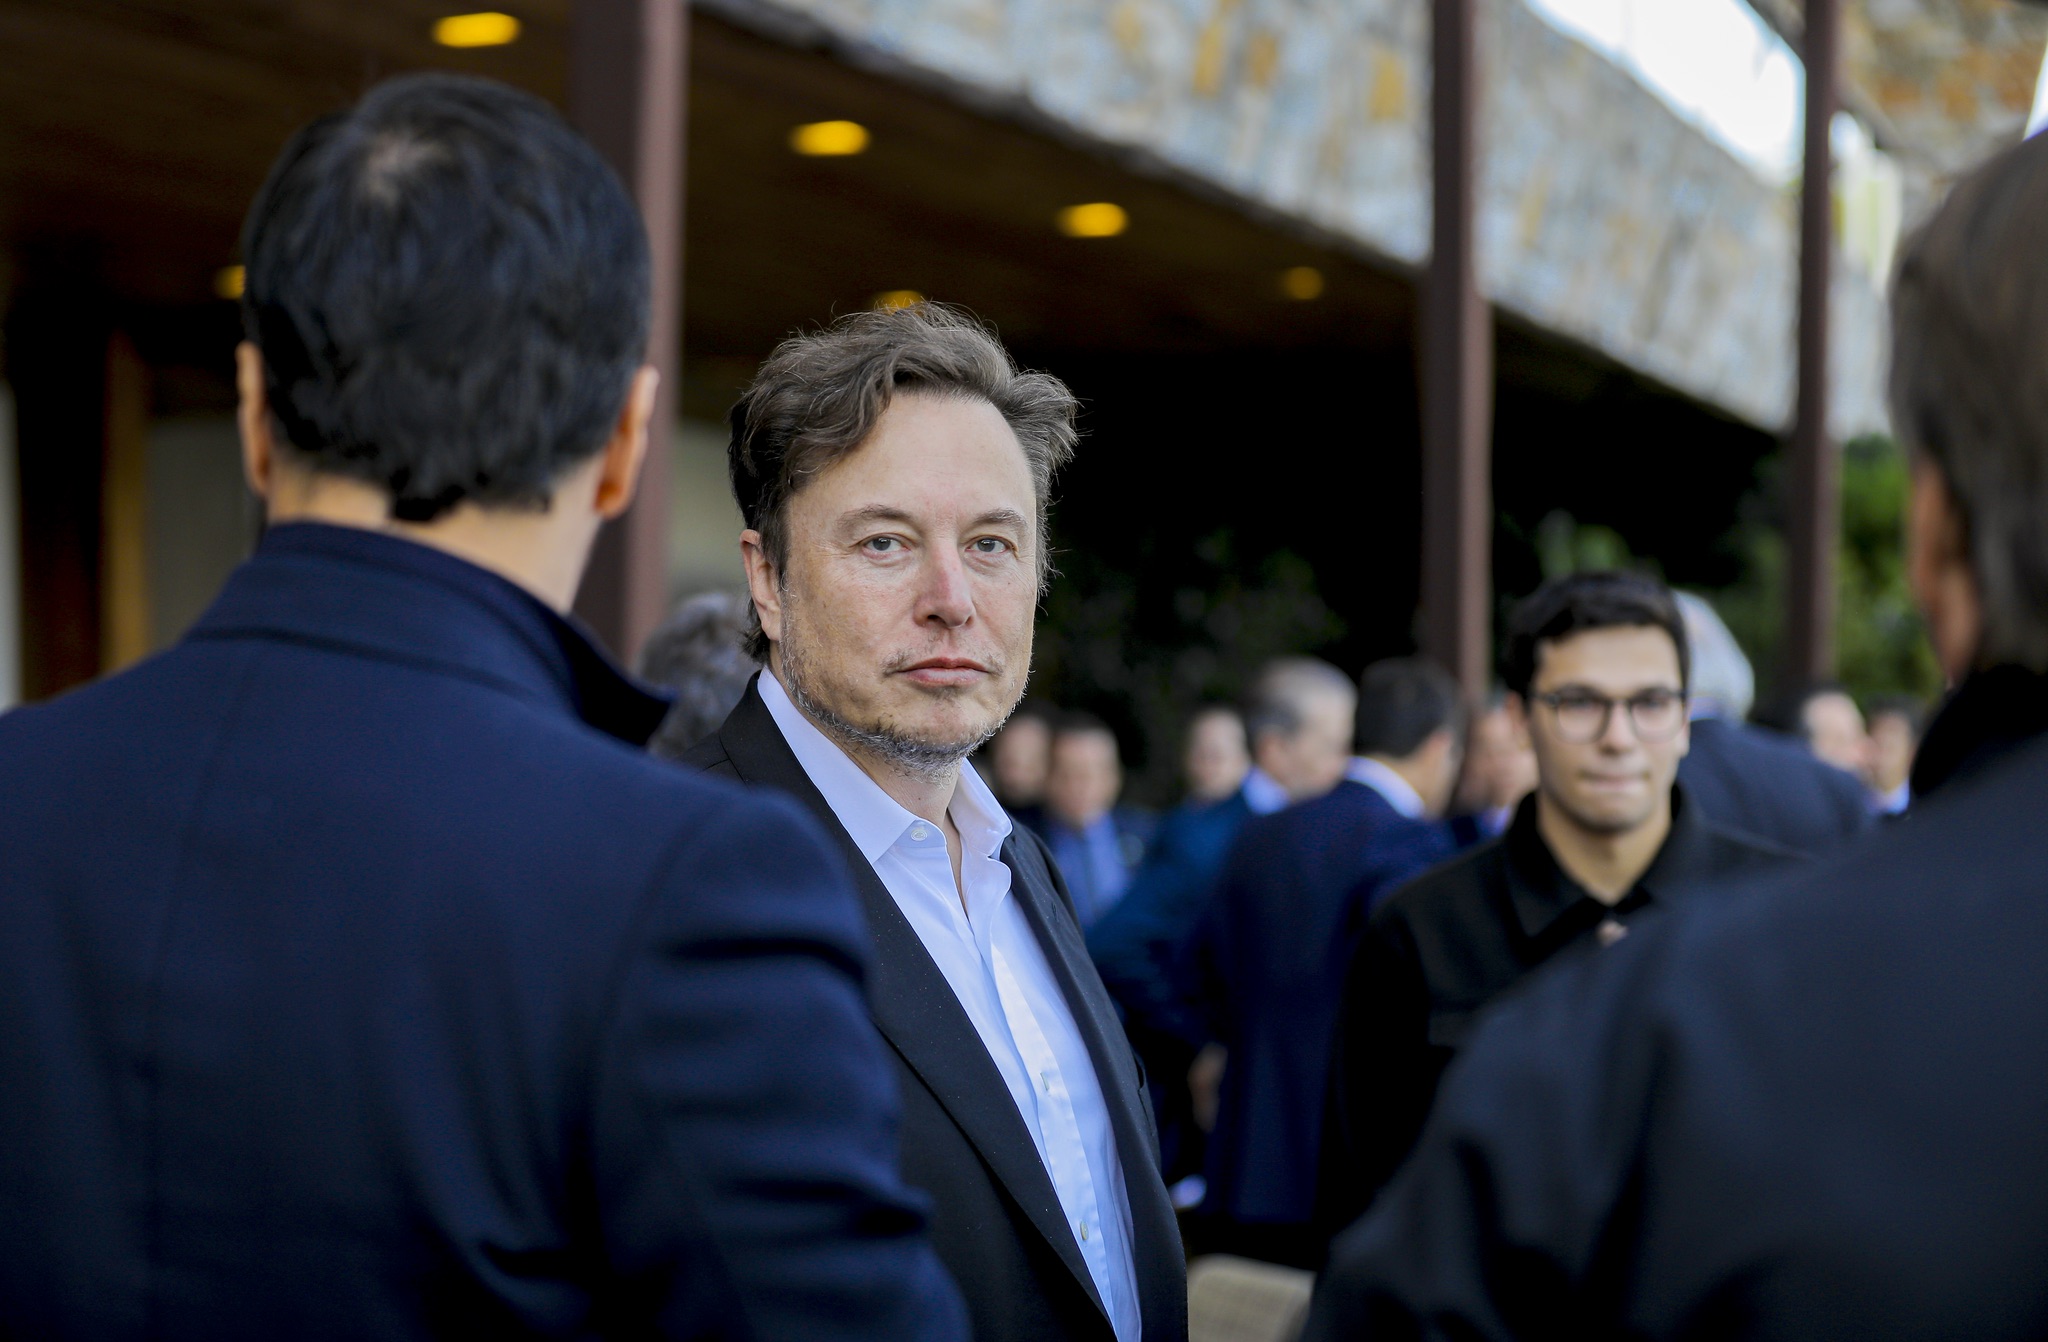 elon-musk-pay-trial-ceo-replacement